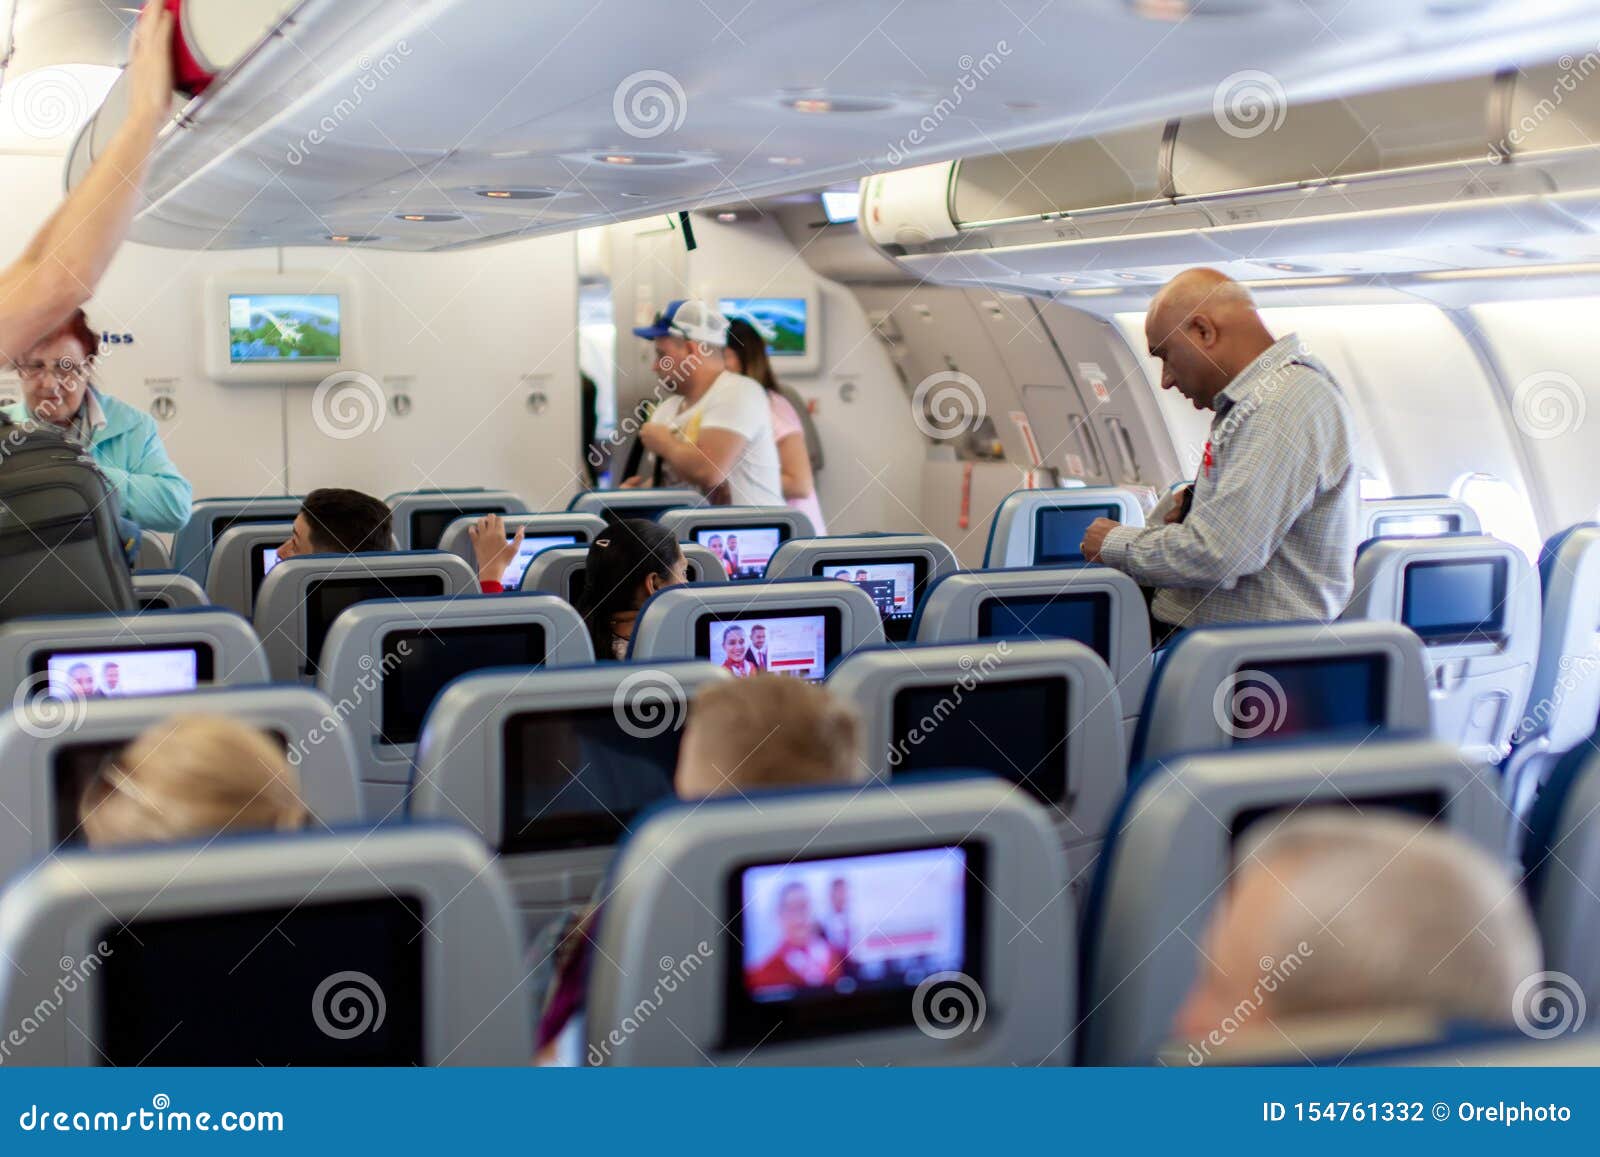 Aircraft Interior With Seats And Blank Touch Screens Displays